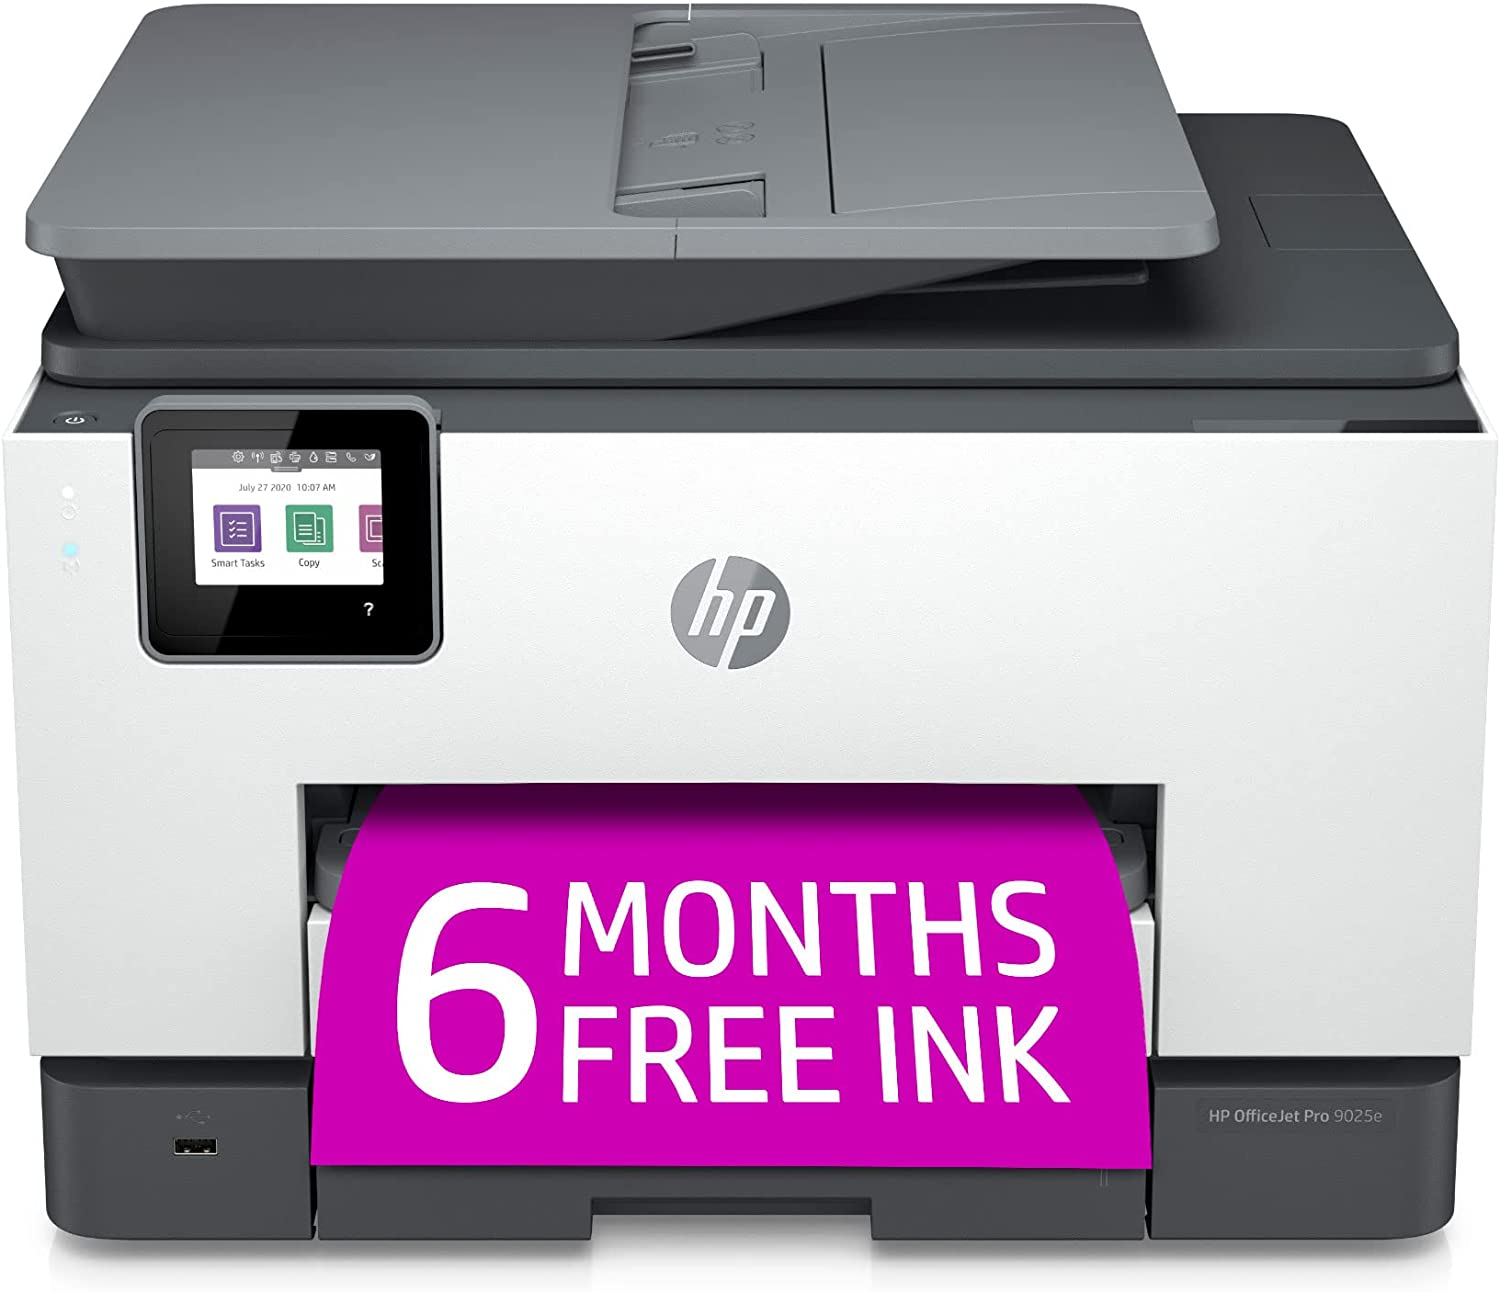 HP OfficeJet Pro 9025e Wireless Color All-in-One [...]